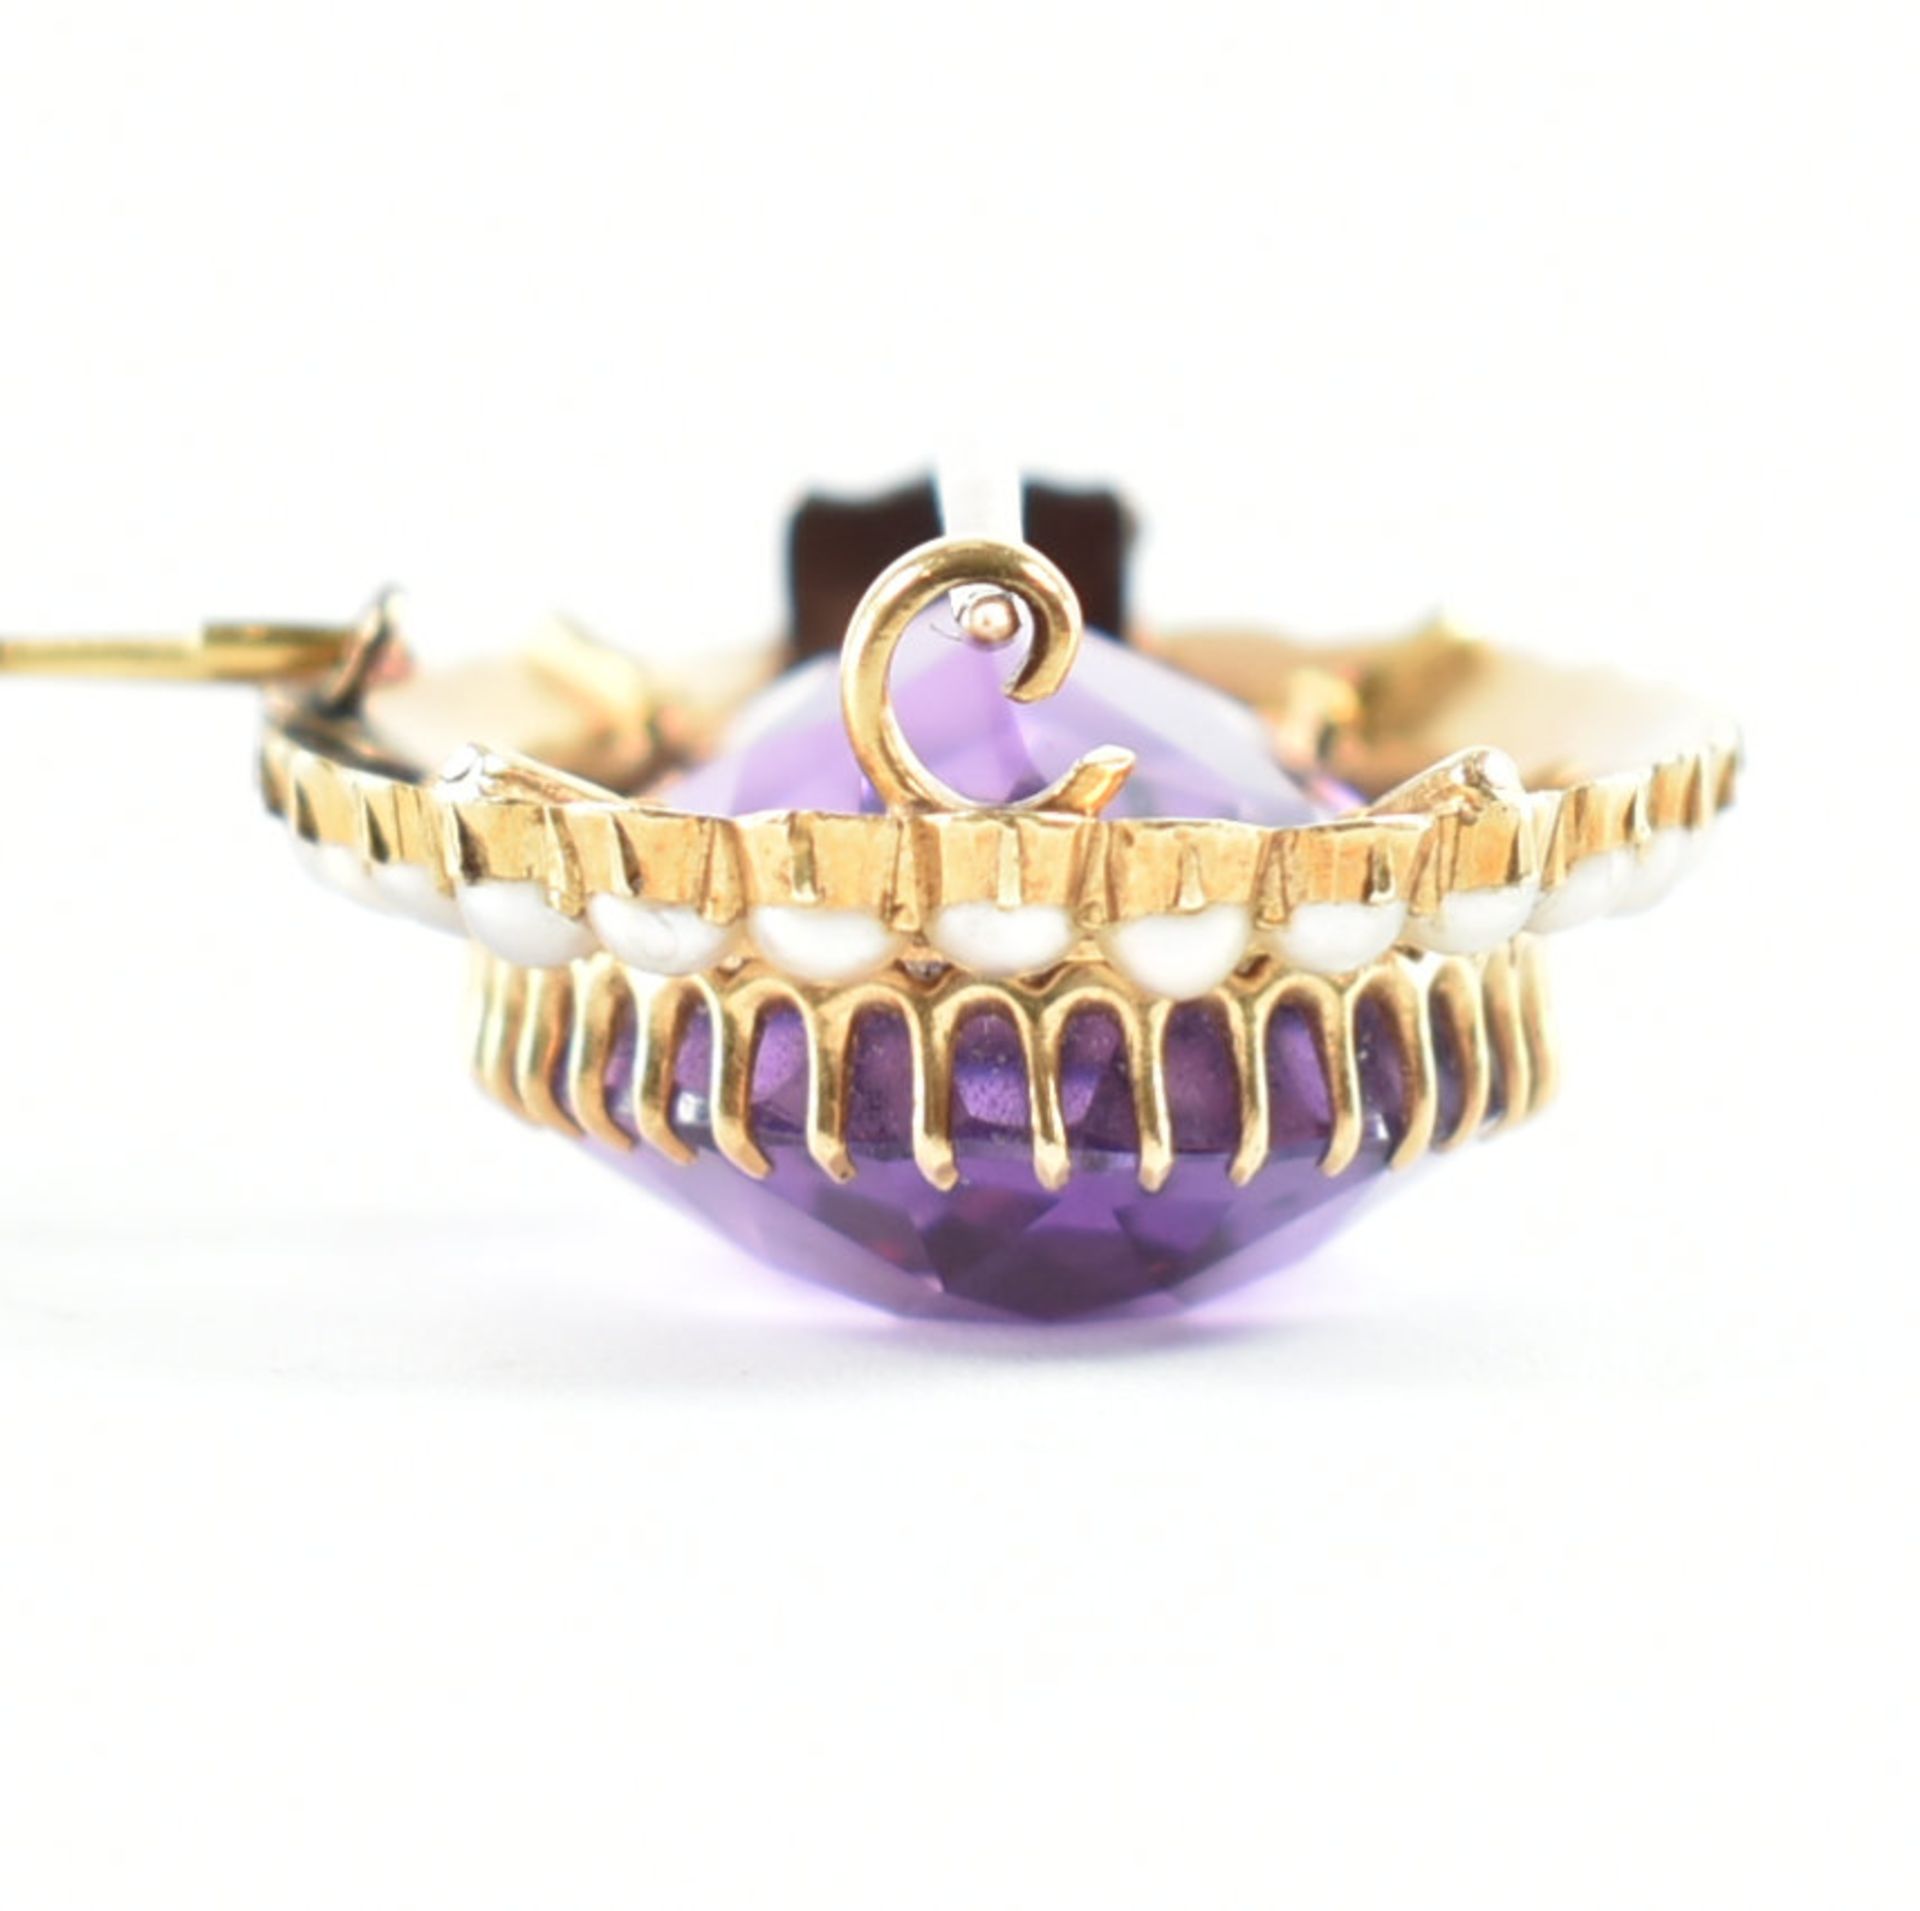 GOLD AMETHYST & SEED PEARL BROOCH PIN - Image 5 of 6